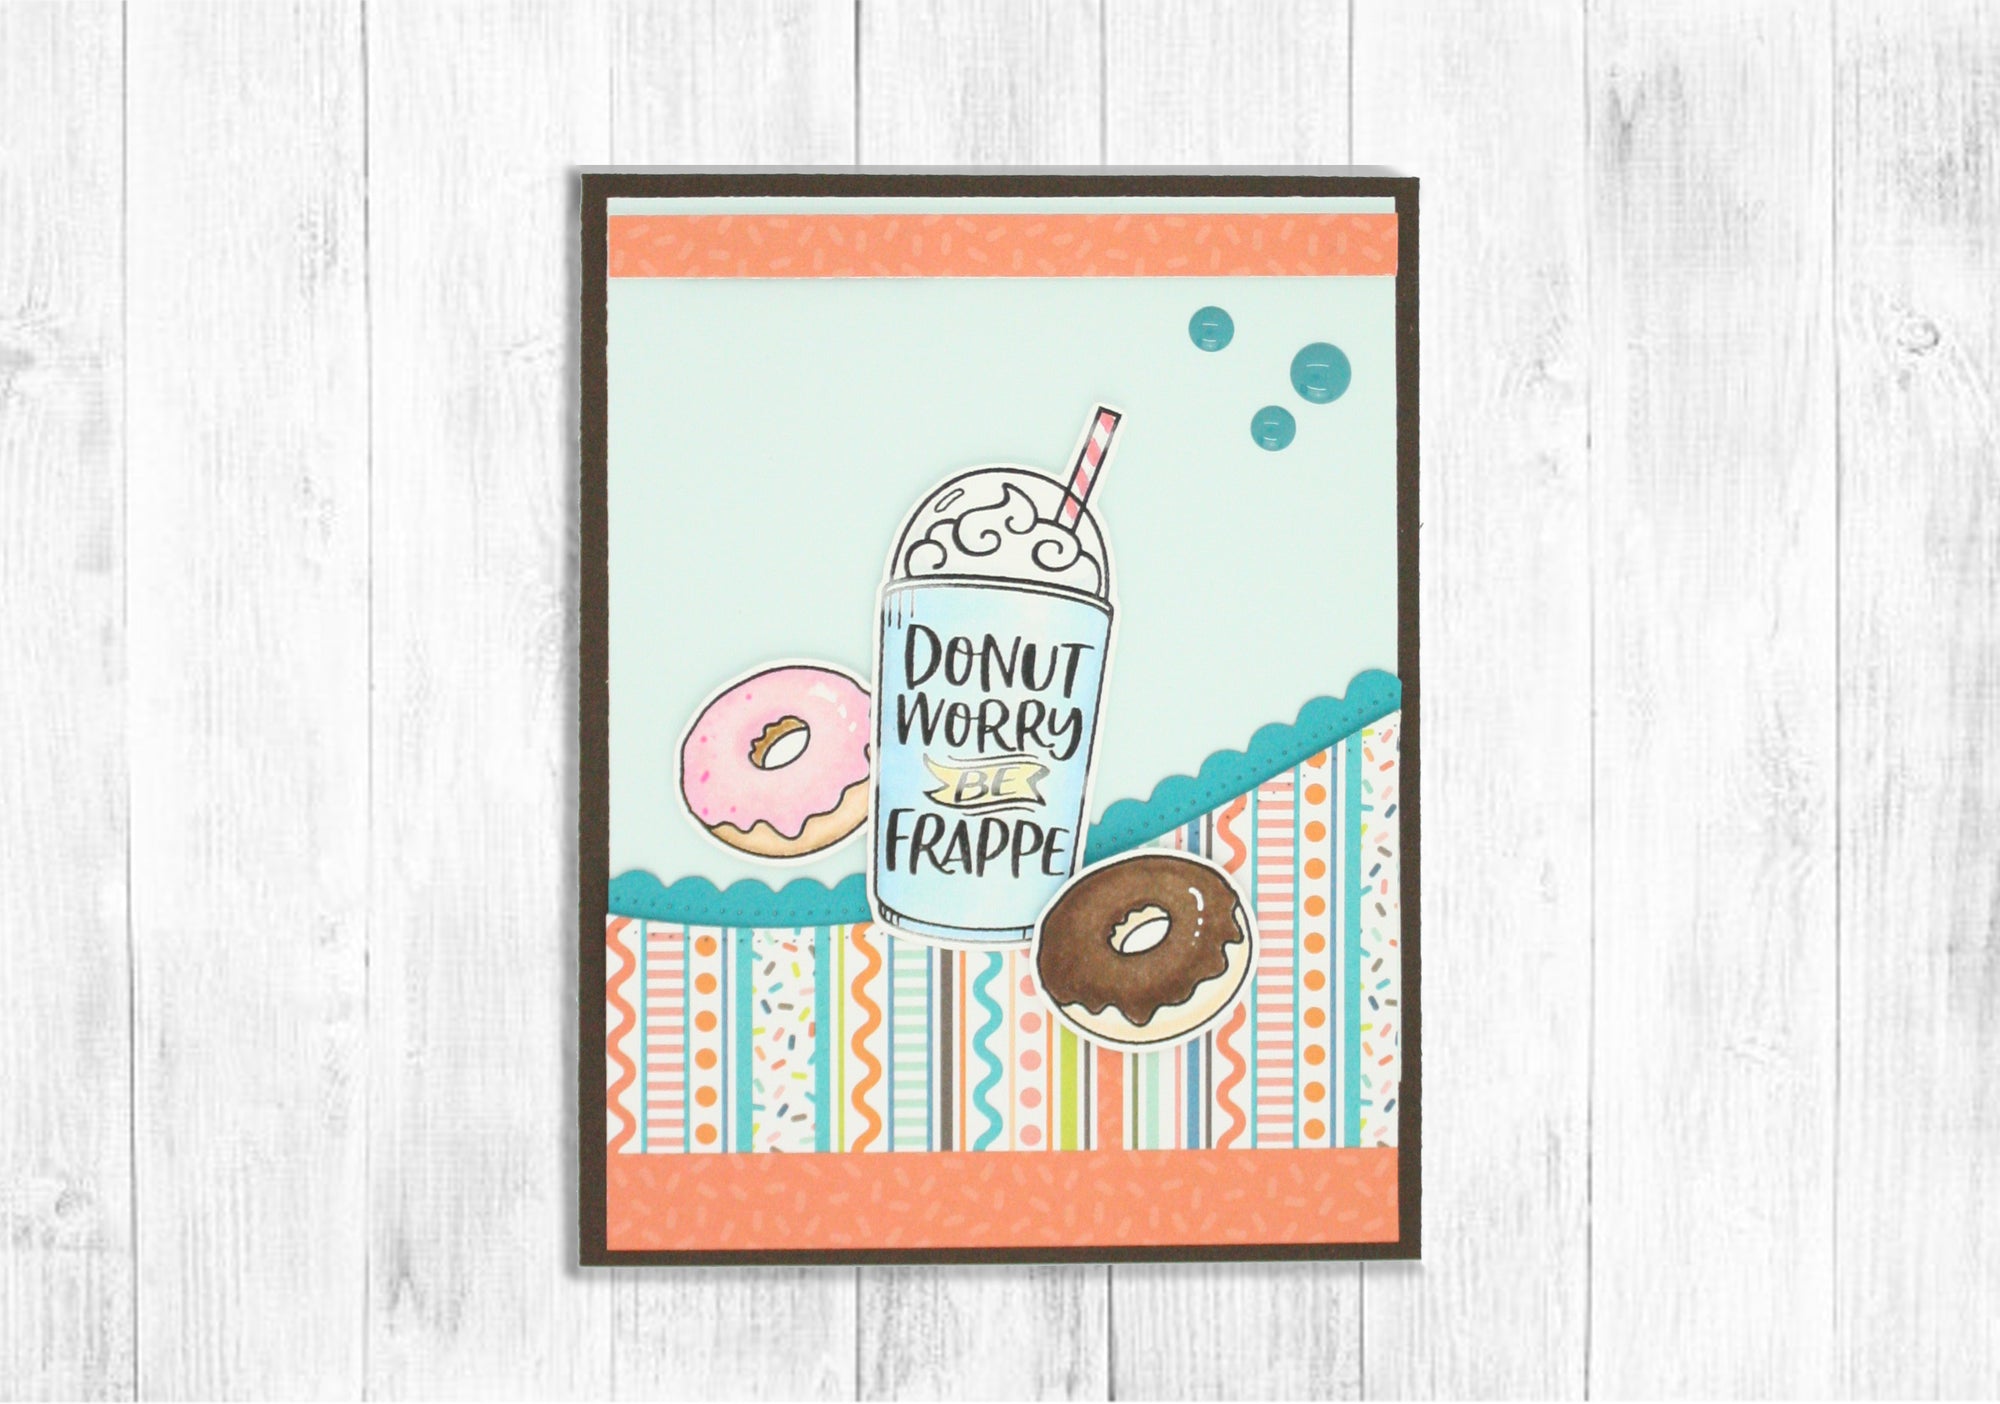 Handmade card using the stamp set, "Be Frappe" from Dare 2B Artzy.  Image of a frappe with two donuts and the sentiment, "Donut worry be frappe". 